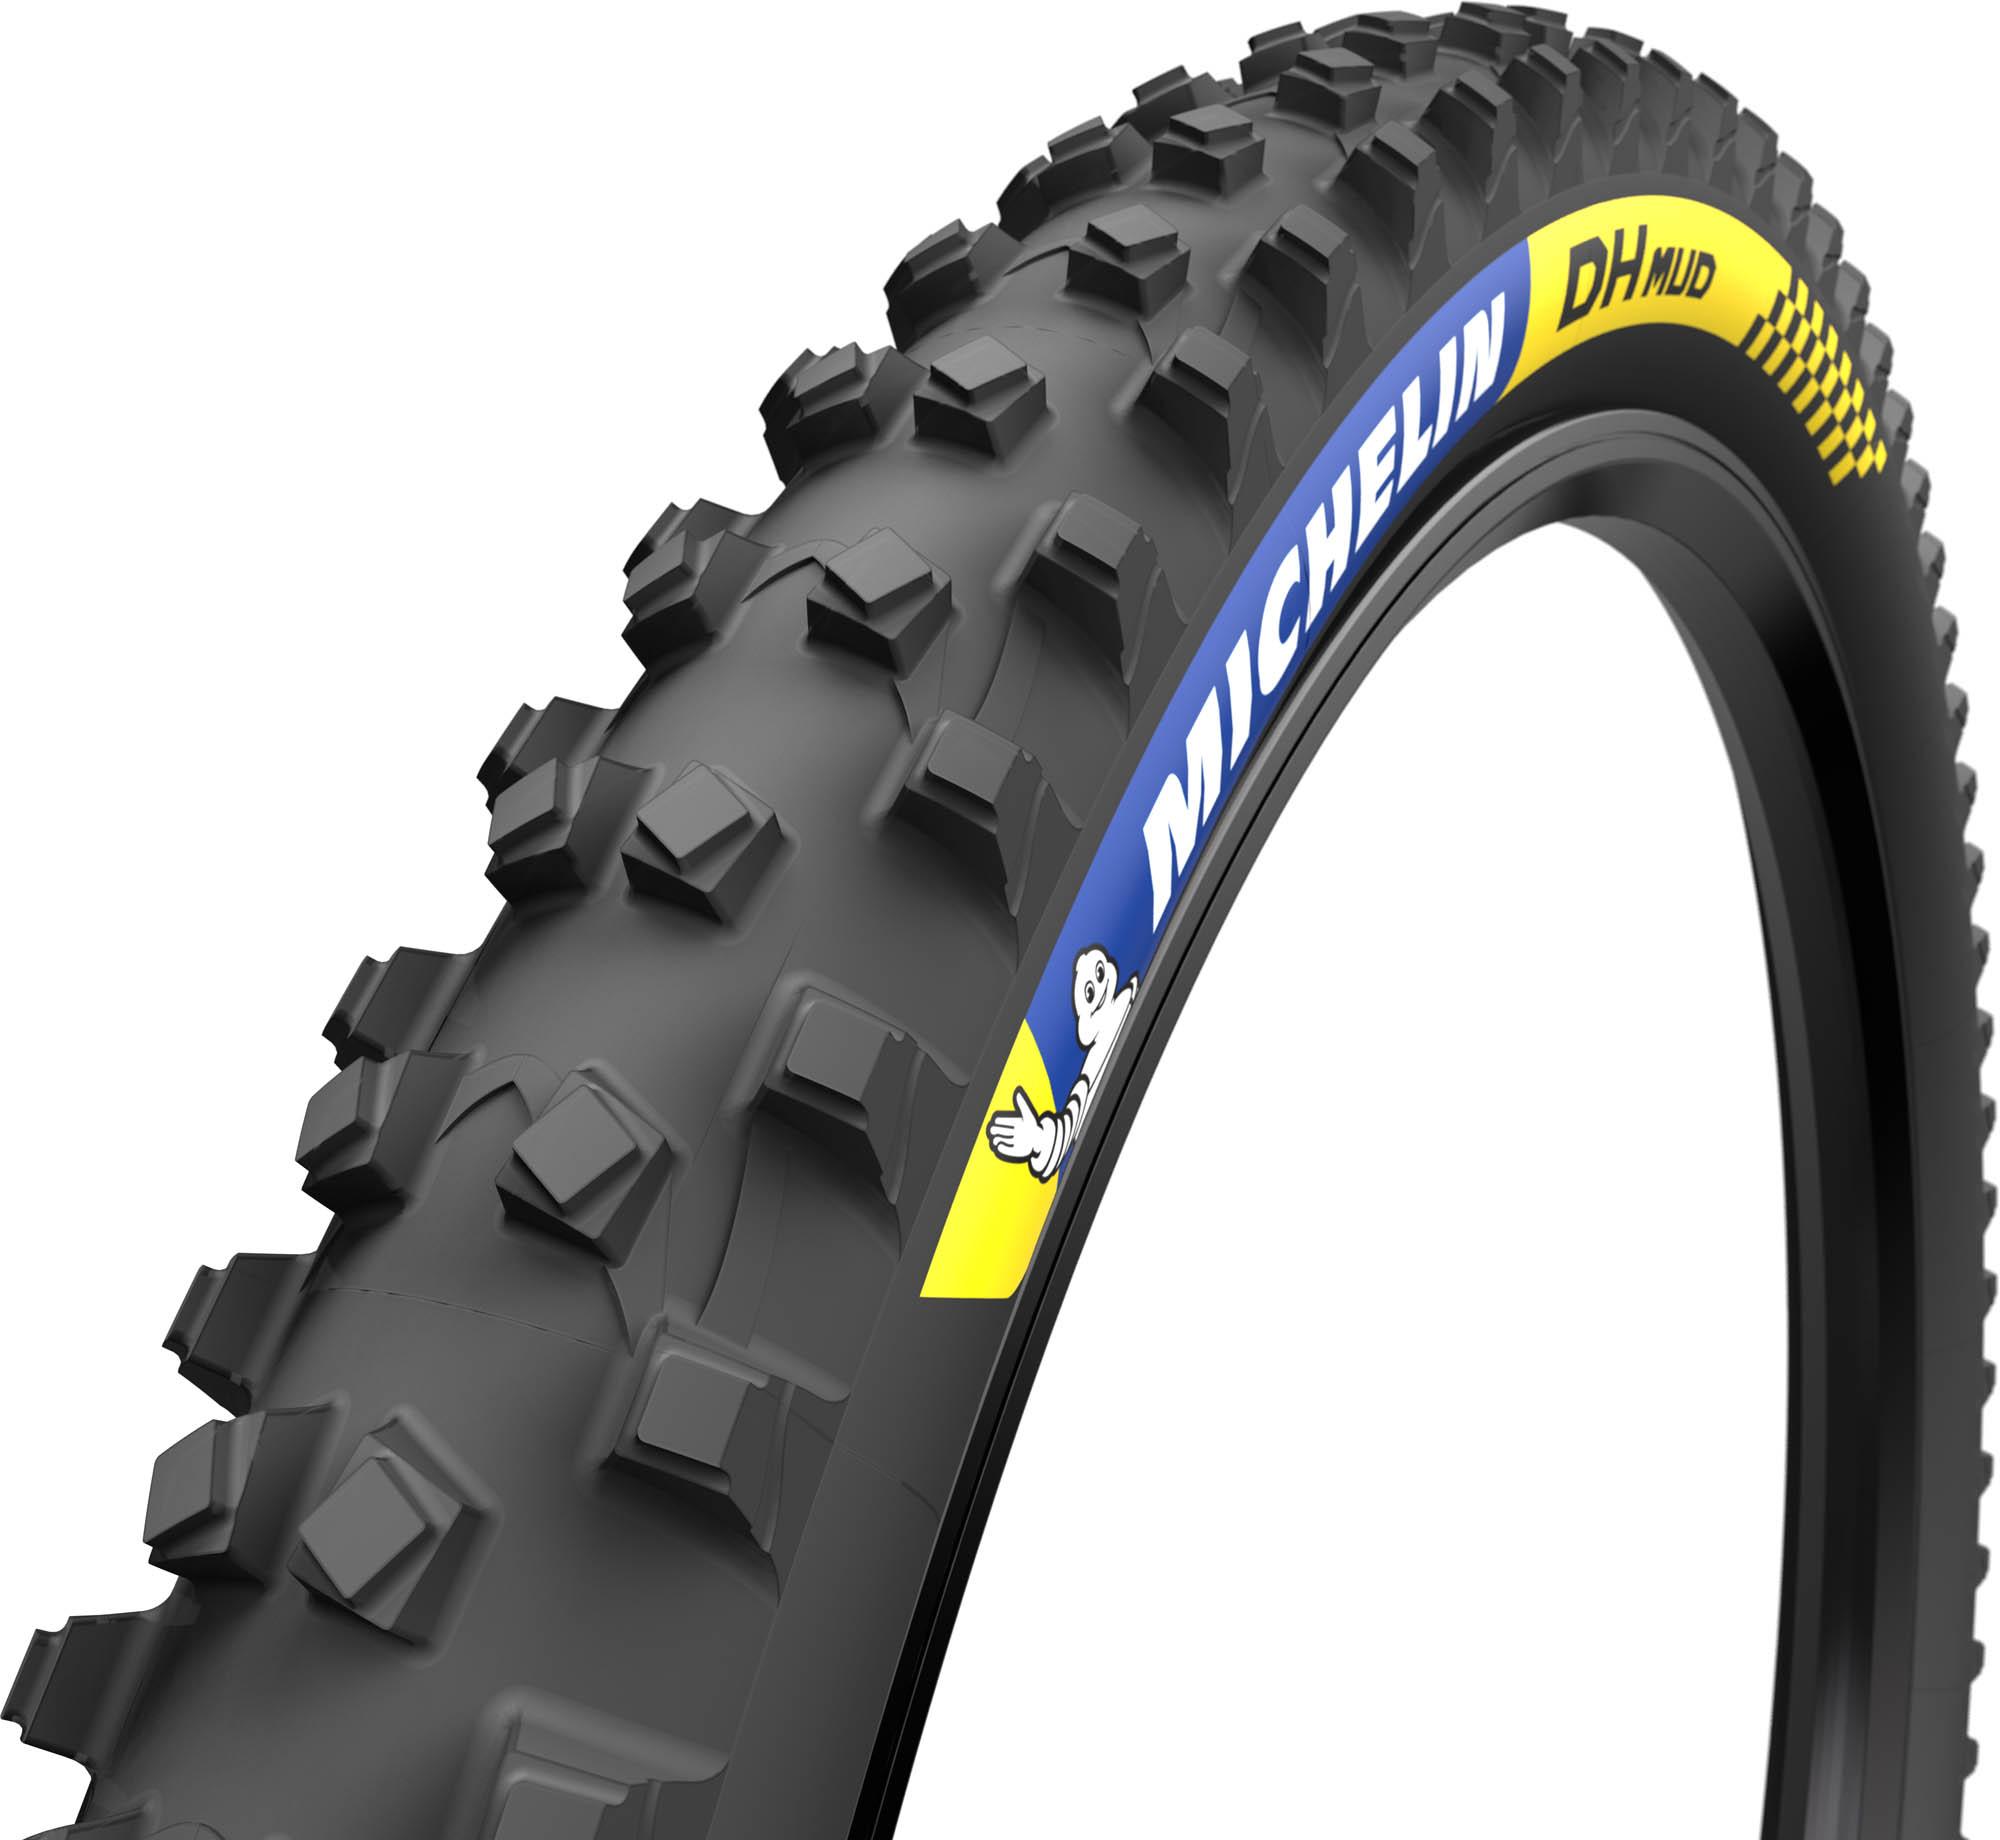 Michelin Dh Mud Tlr Mountain Bike Tyre  Black